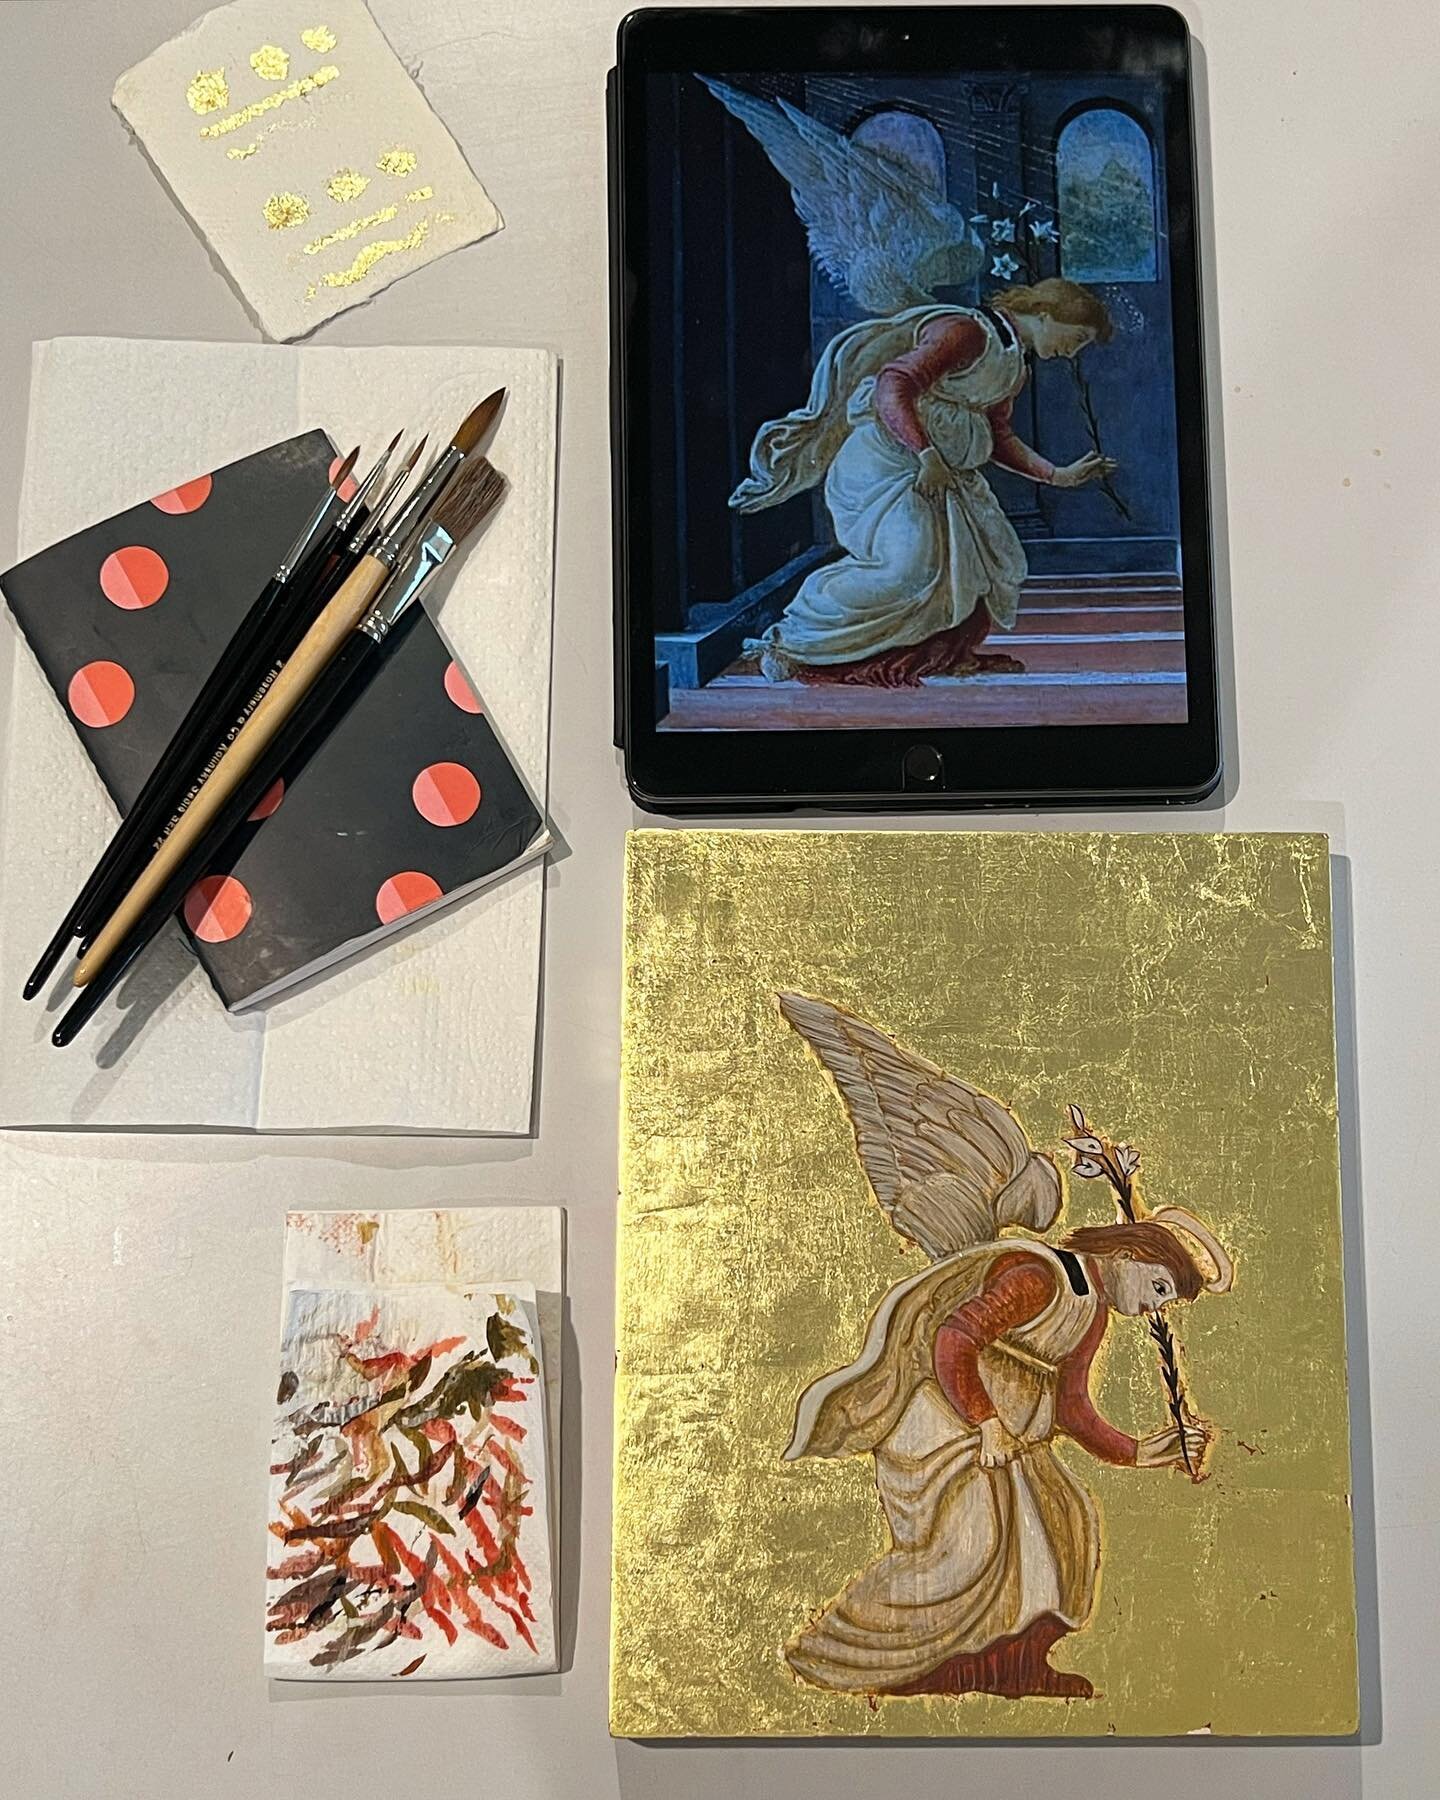 Five days of gilding on gesso and painting with egg tempera &amp; it was really interesting! So much to practice and to learn still though. My poor angel&rsquo;s face need a complete makeover lol!
.
Thank you @alchemyofpaint for a great class! :) 
.
